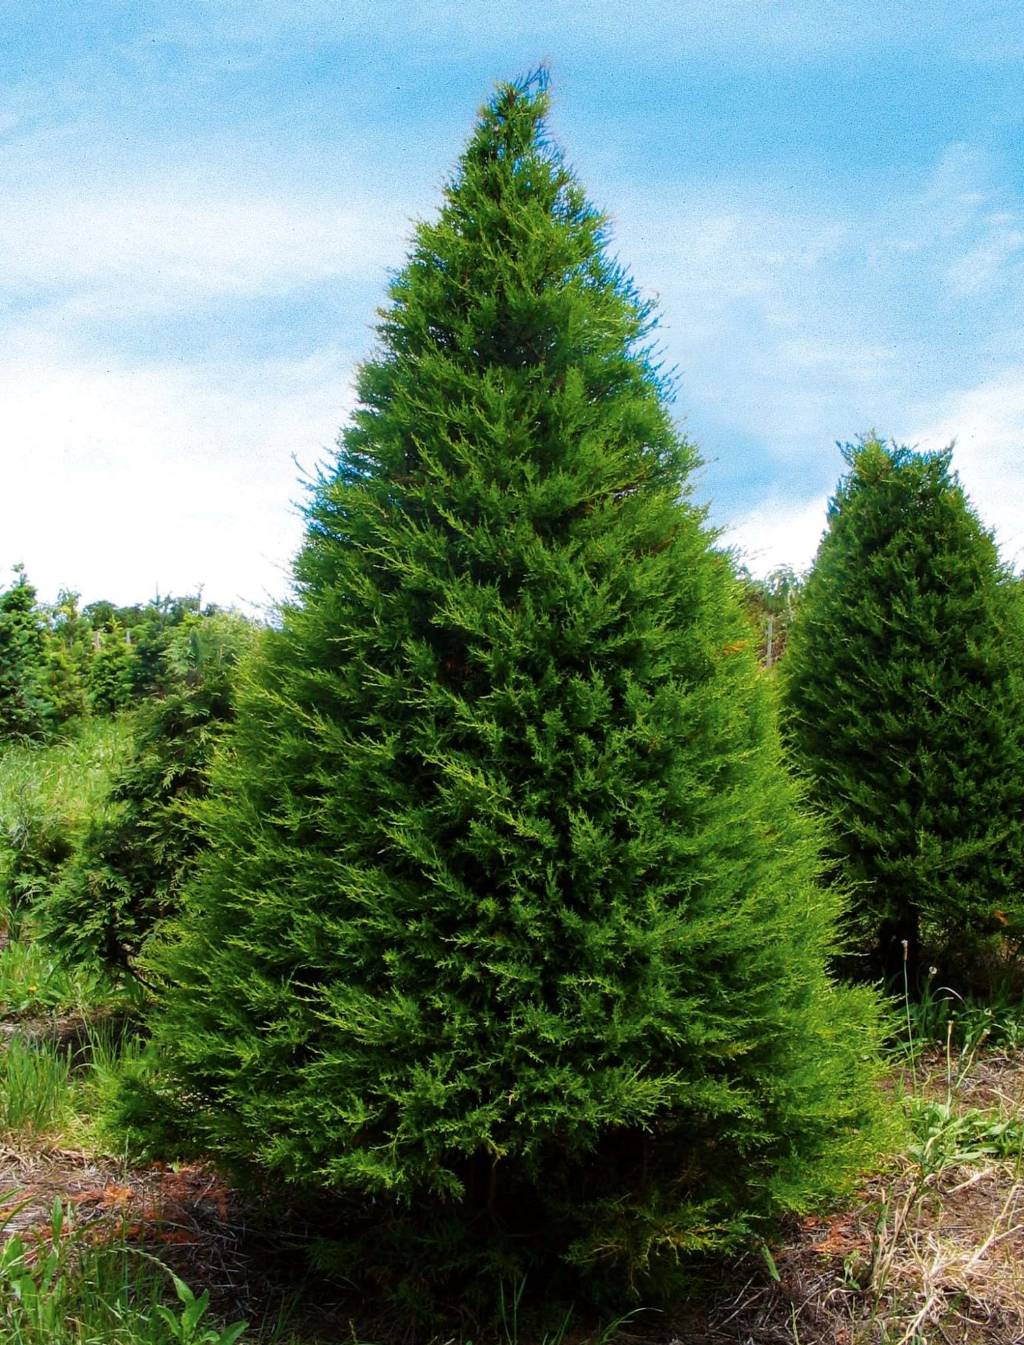 Christmas Tree Shortage Nationwide Prompts Increased Prices and Limited Variety